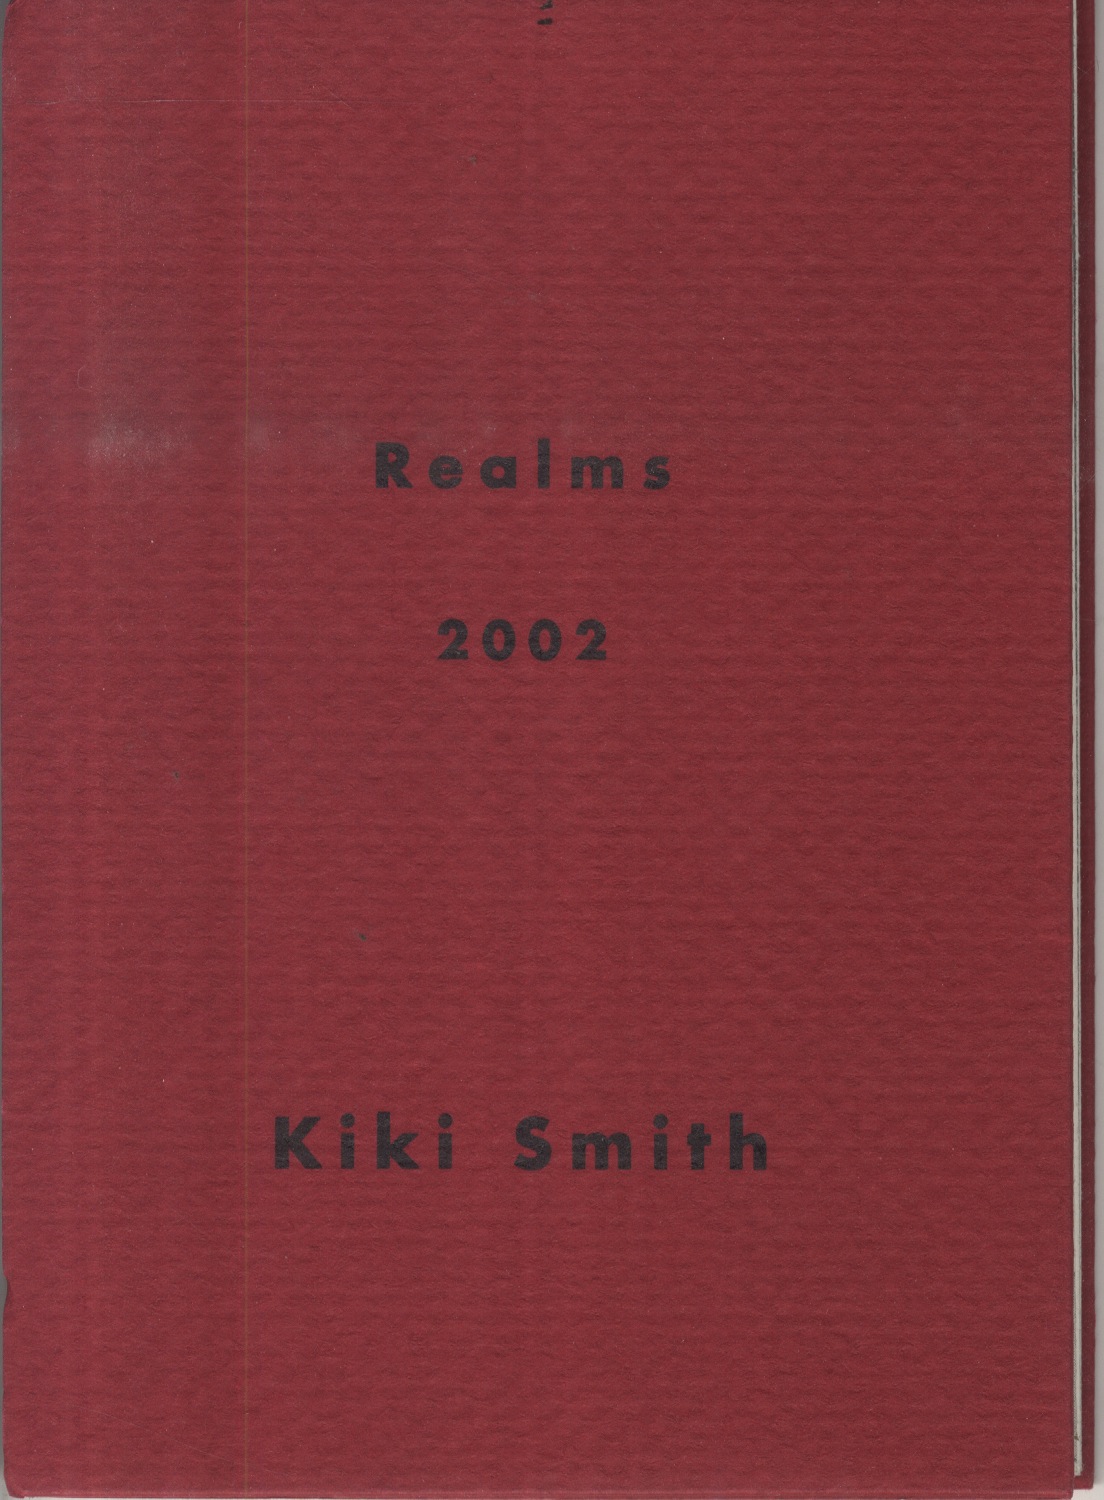 Deep red book cover with embossed texture and title in the center 